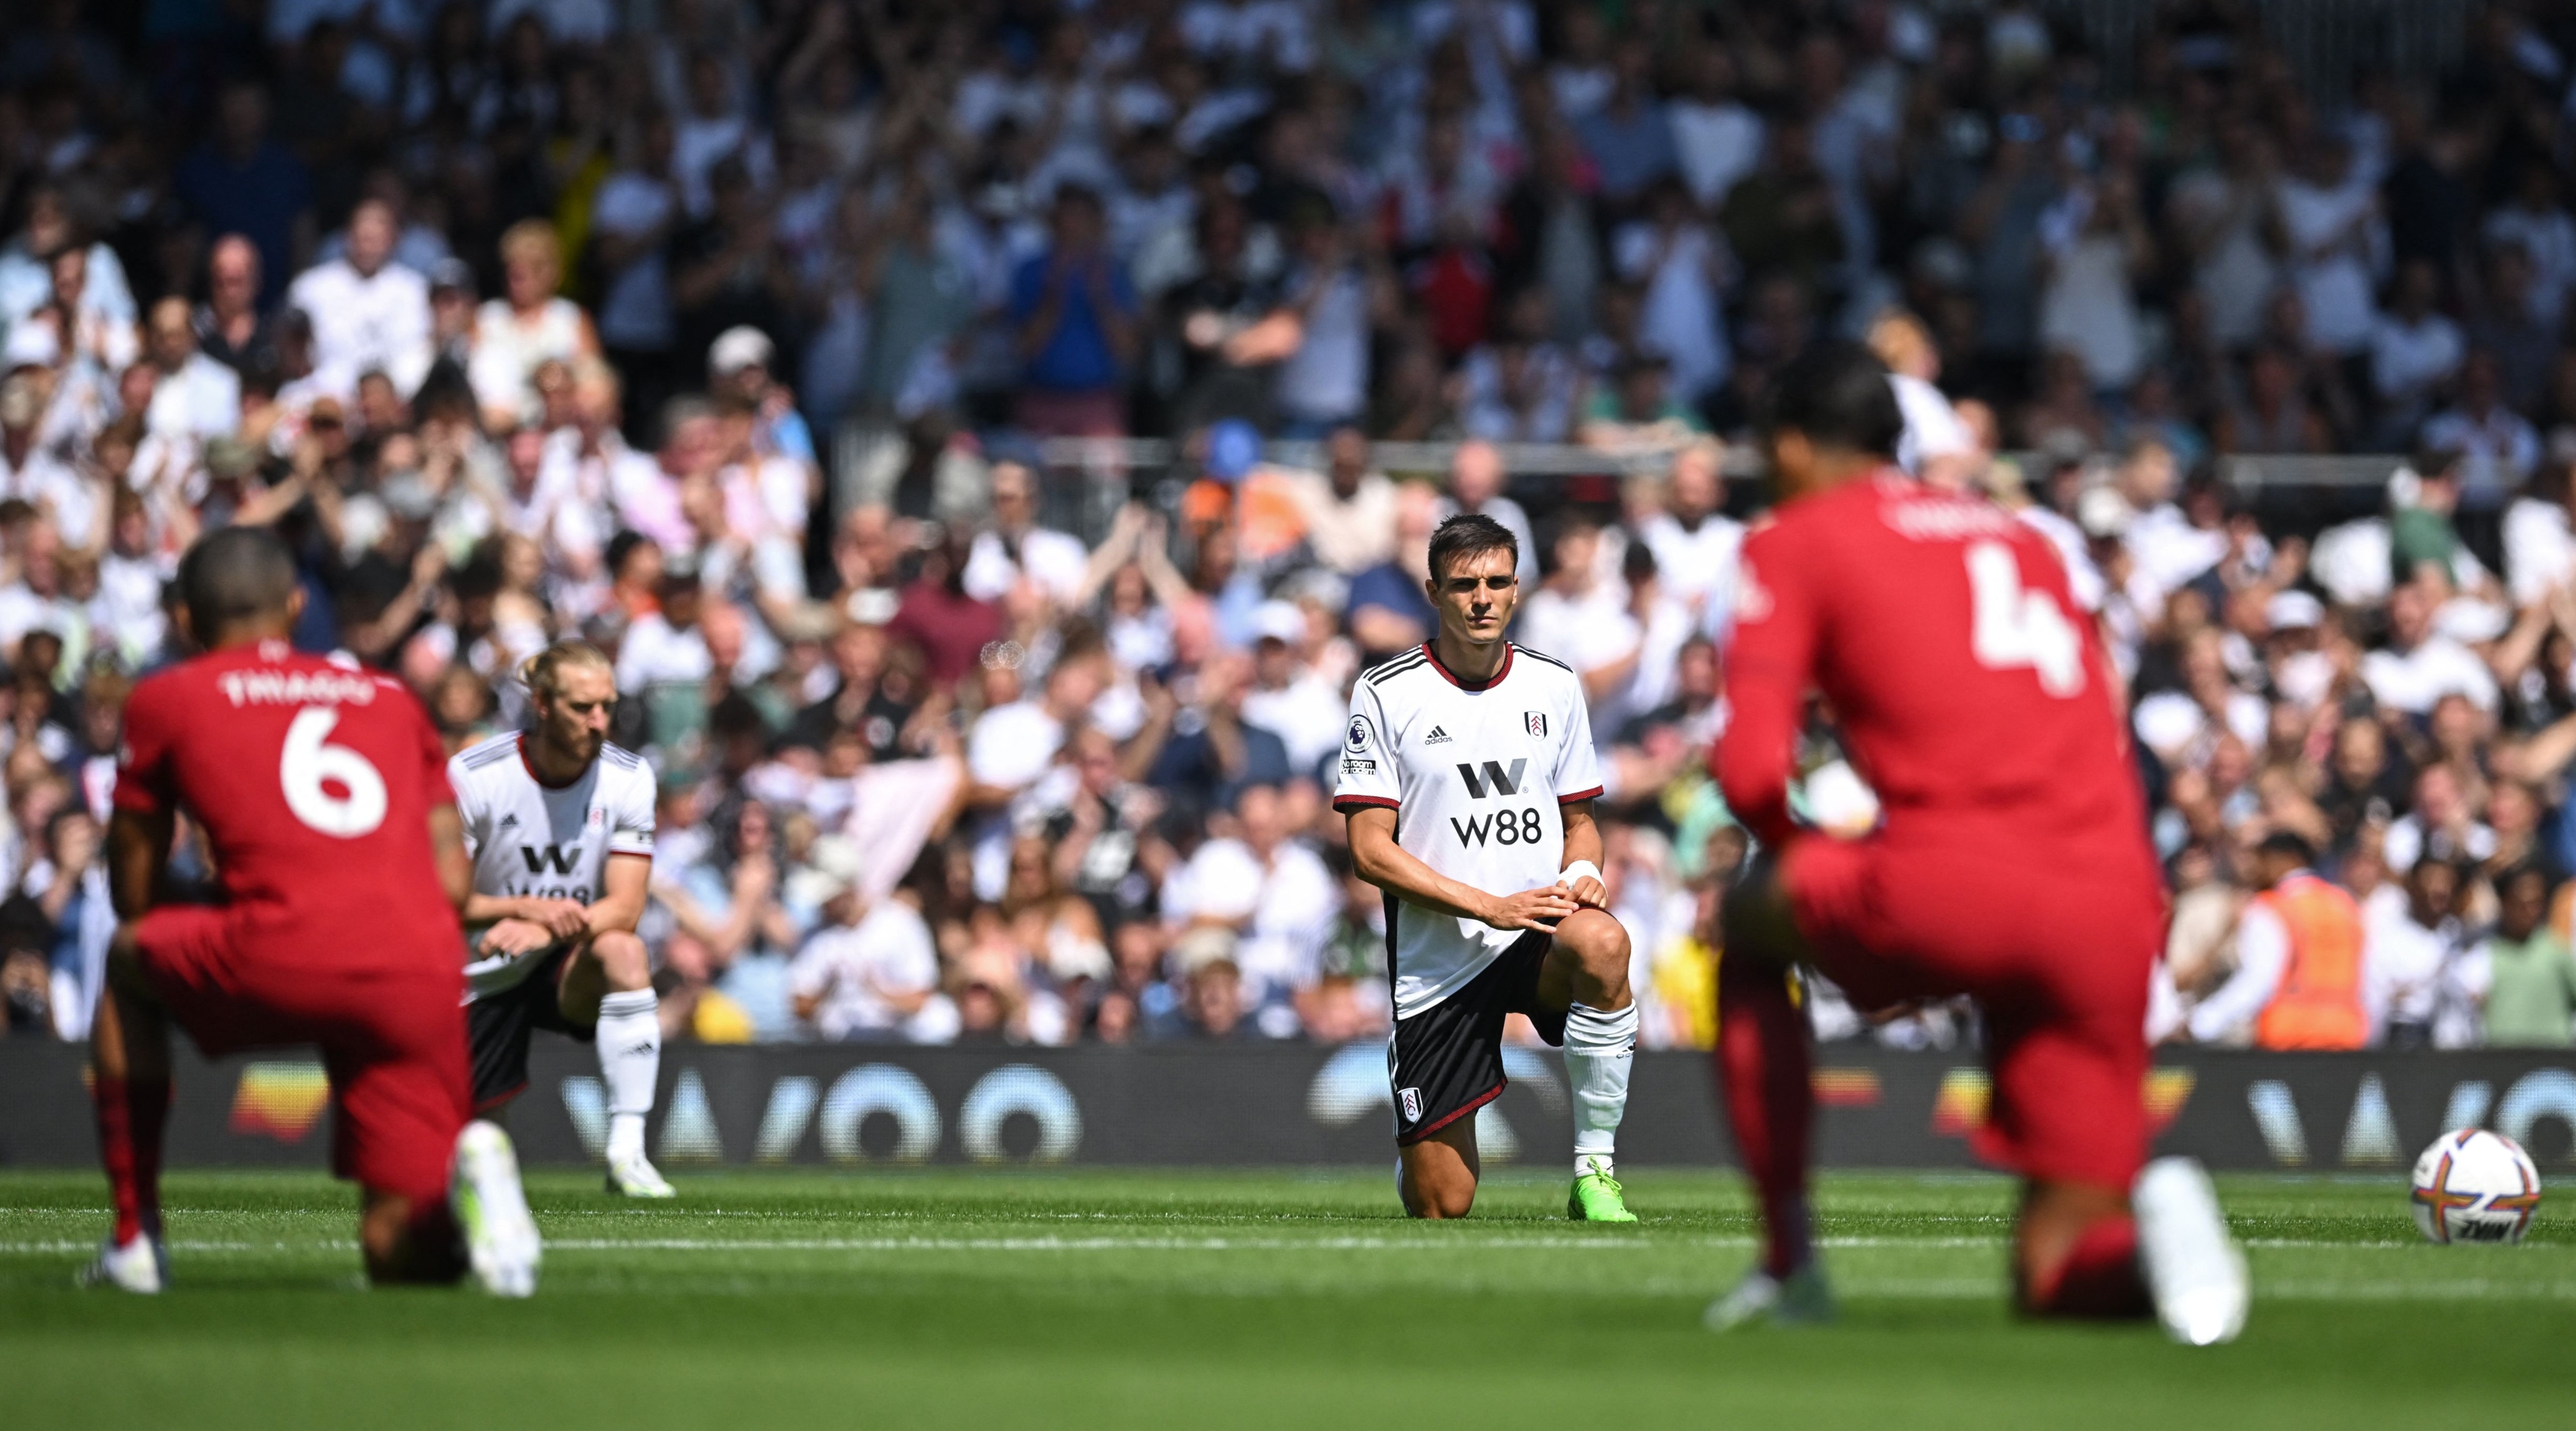 Players take a knee in support of the Premier League's No Room For Racism campaign ahead of the English Premier League football match between Fulham and Liverpool at Craven Cottage in London on August 6, 2022